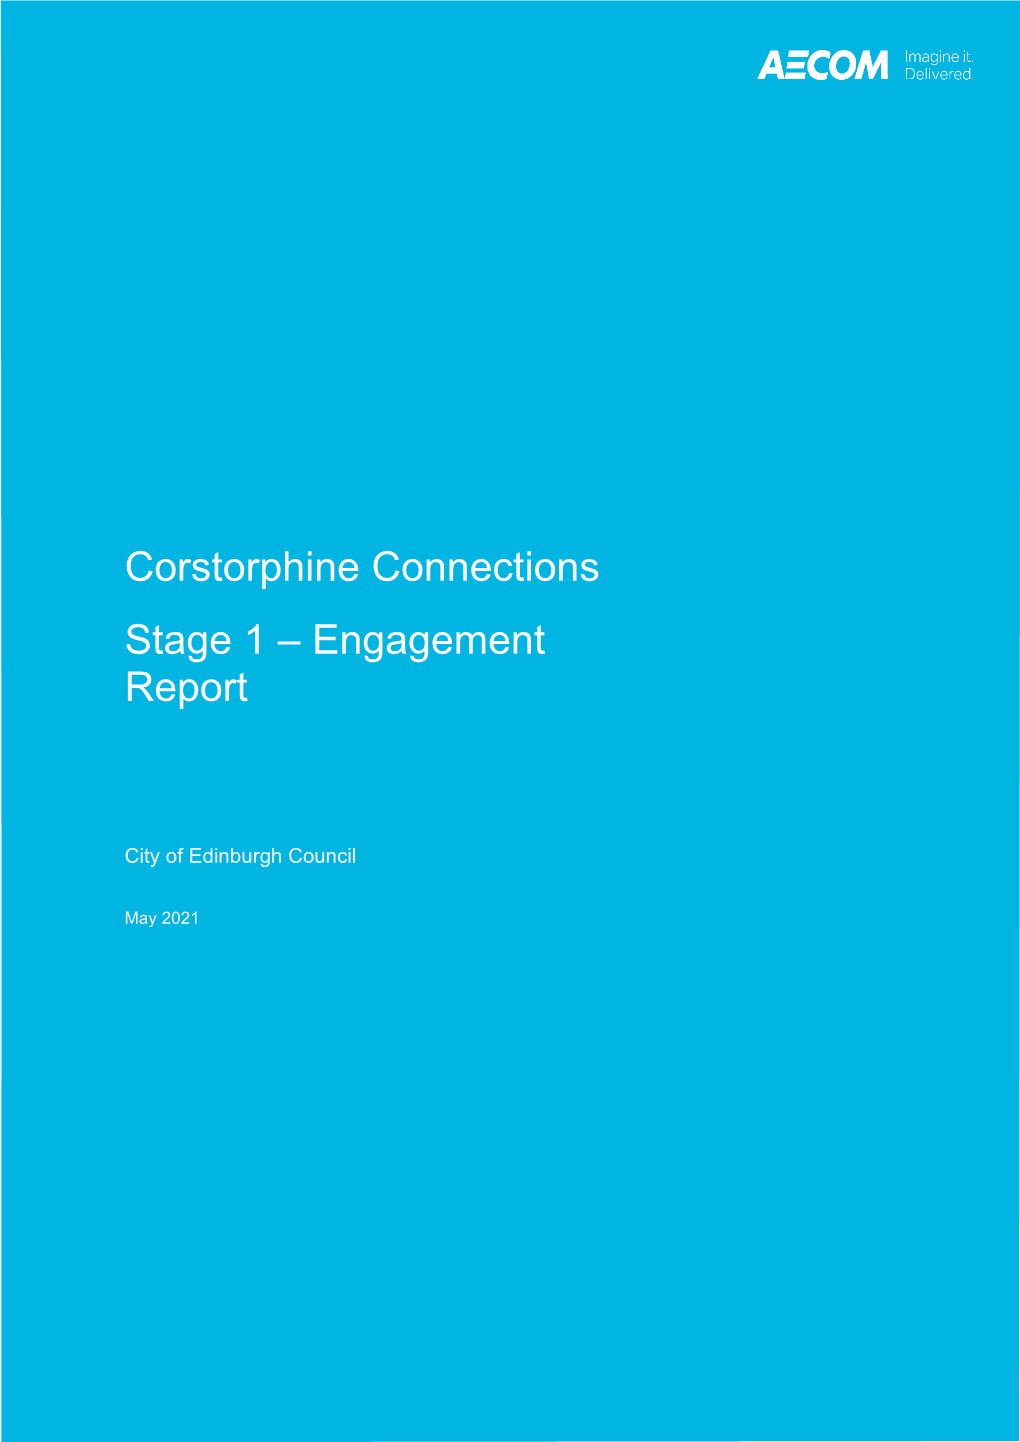 Corstorphine Connections Stage 1 – Engagement Report